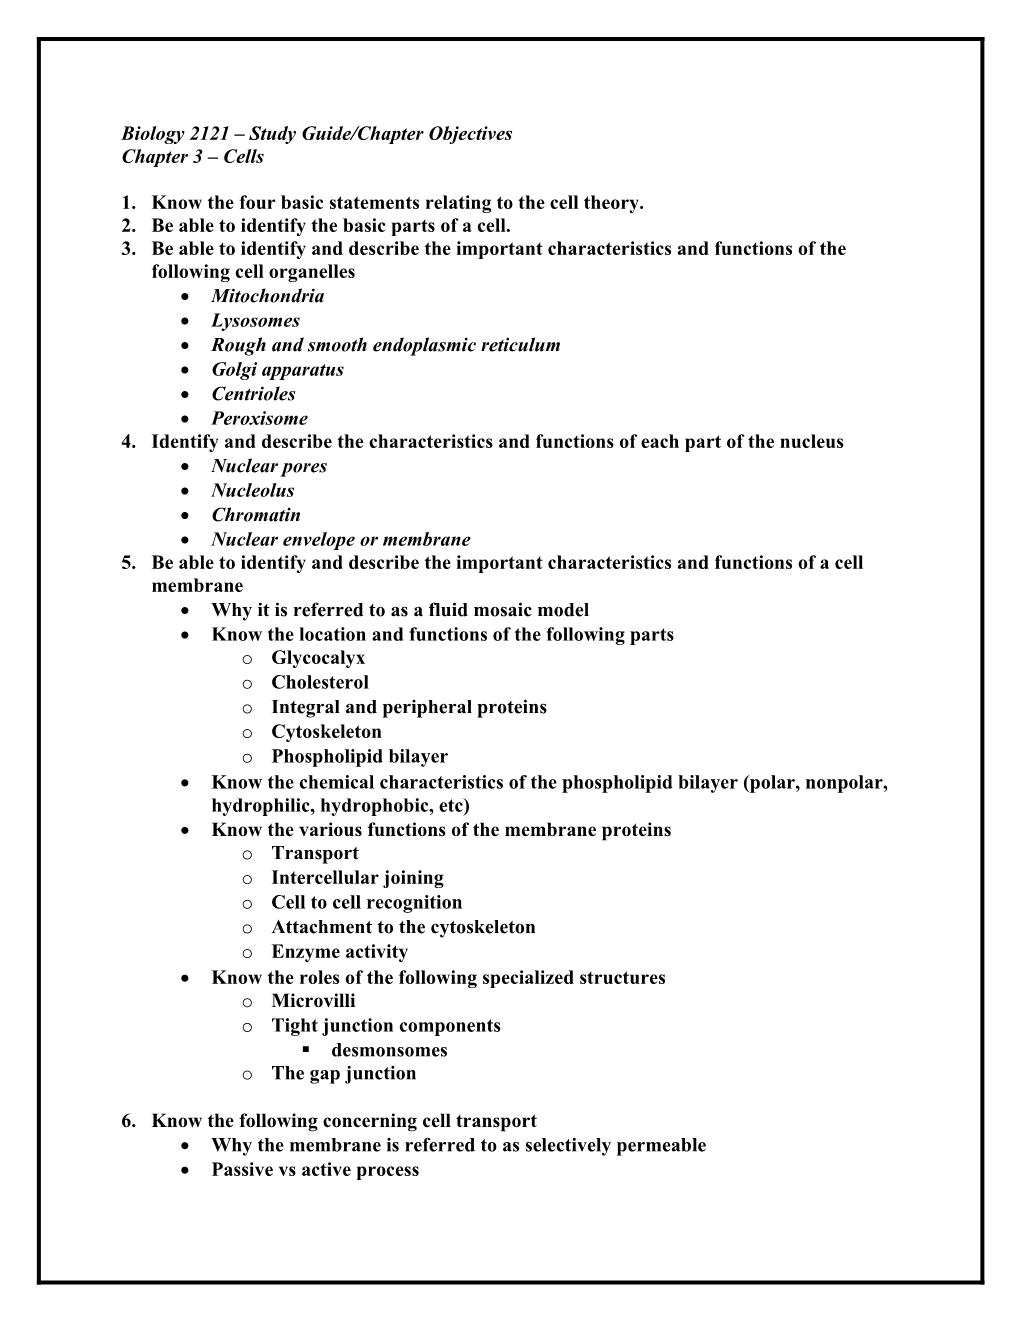 Biology 2121 Study Guide/Chapter Objectives